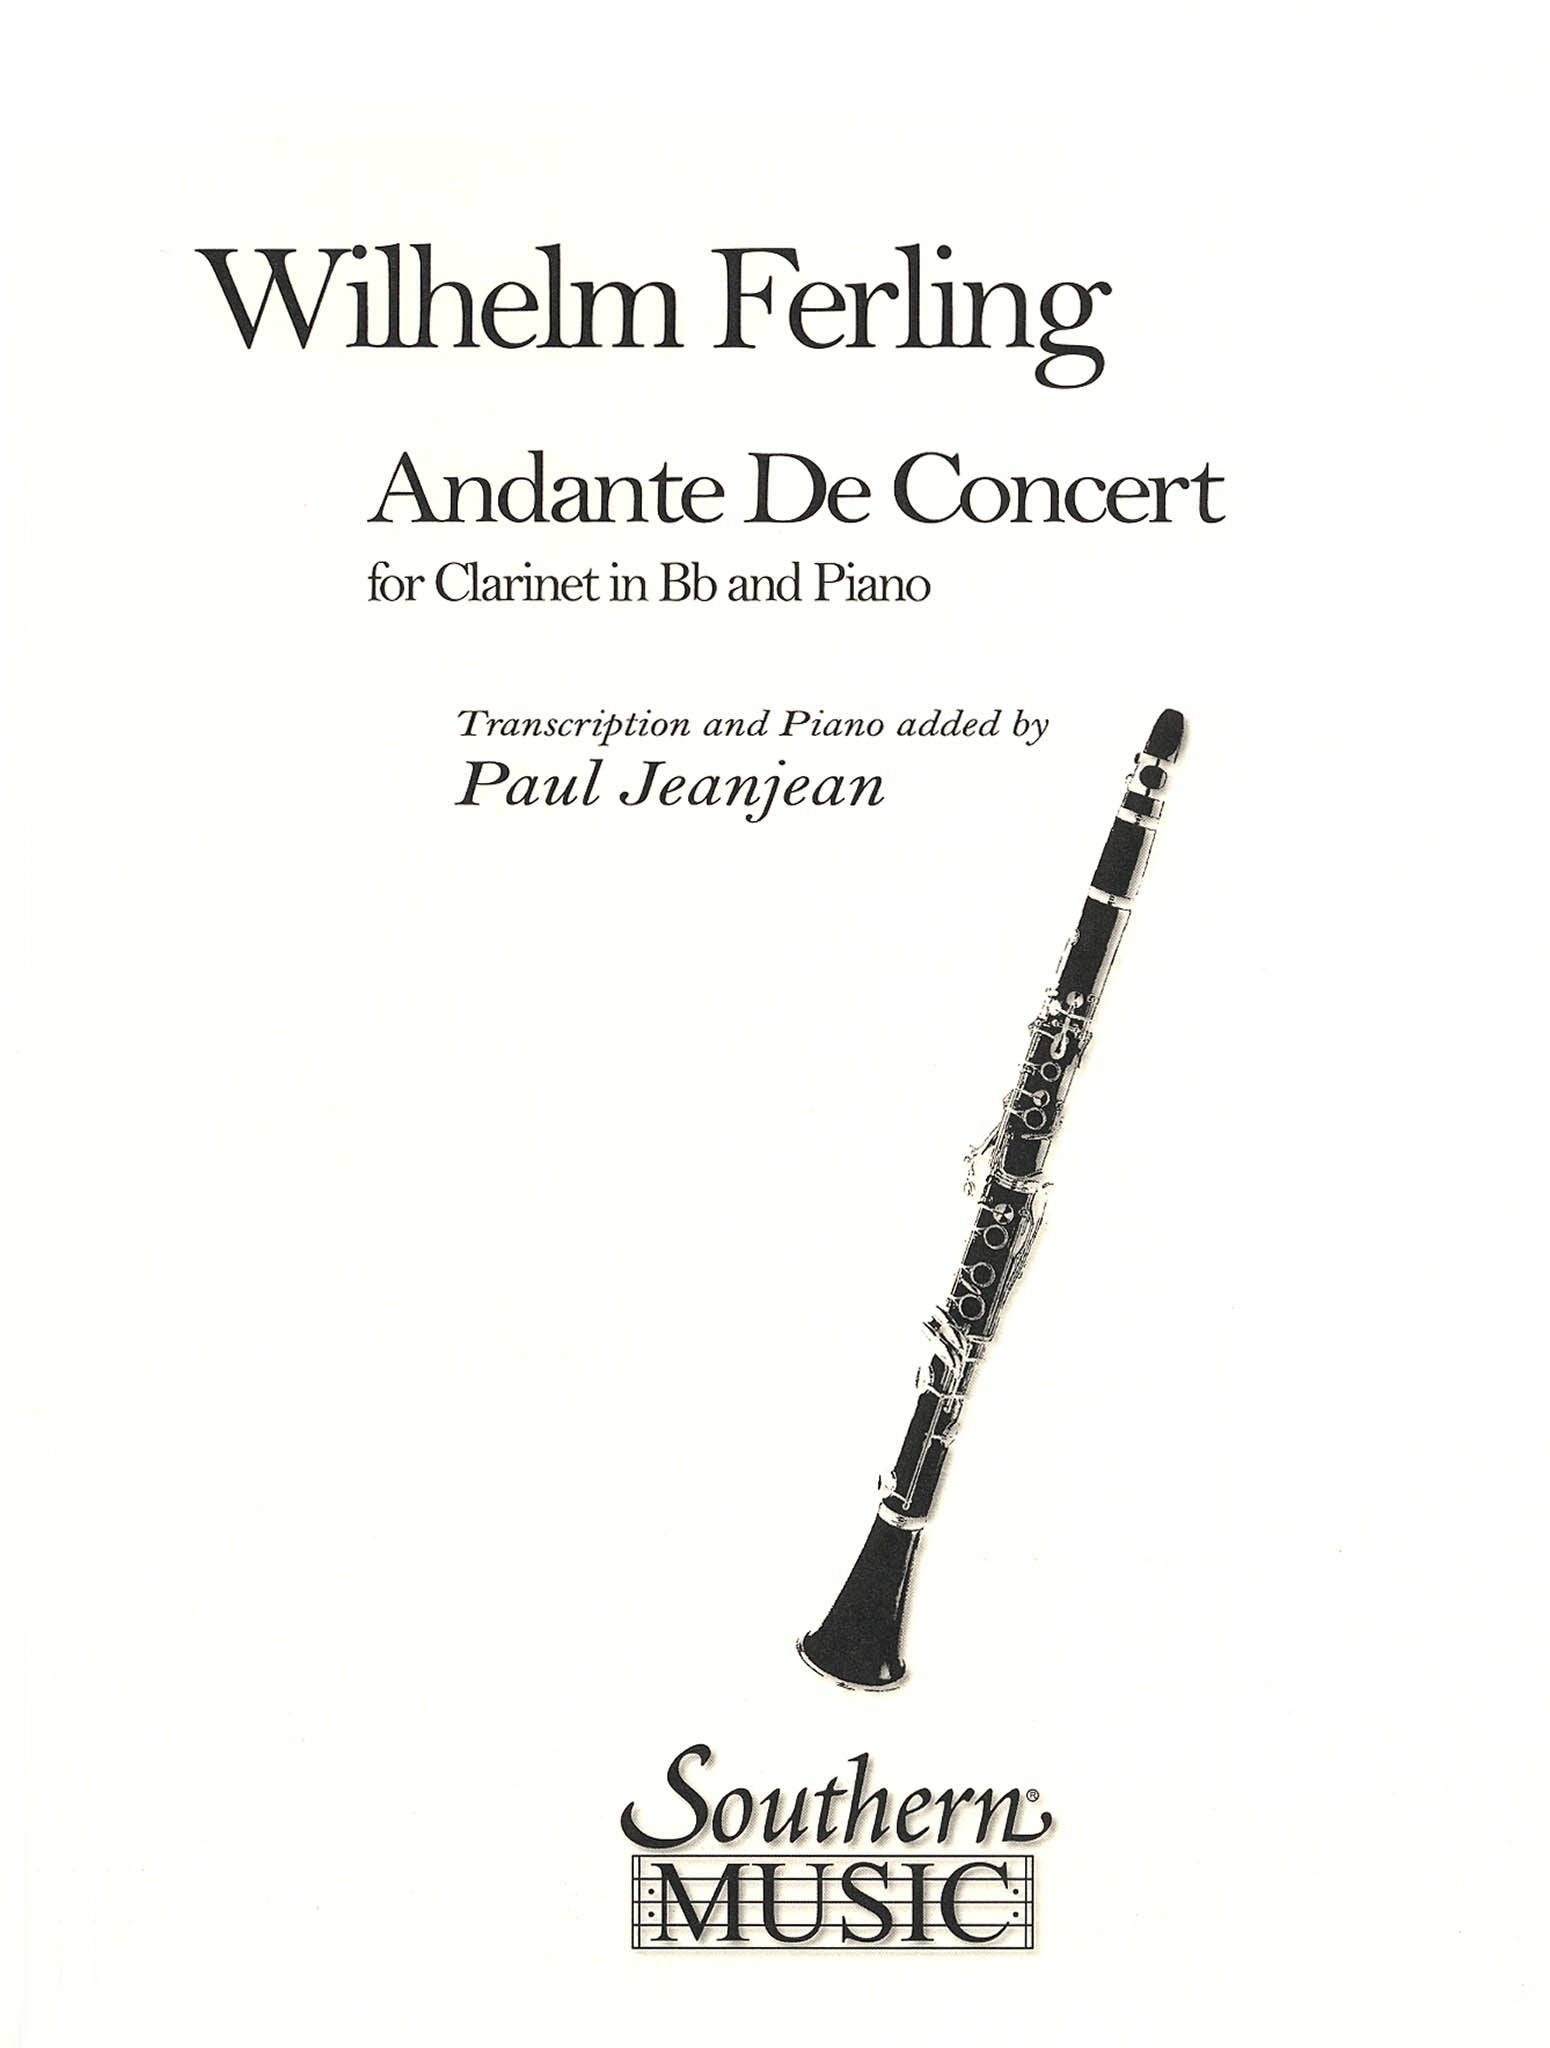 Ferling Andante de concert, from 48 Études, Op. 31 No. 27 arranged by Jeanjean for clarinet & piano cover